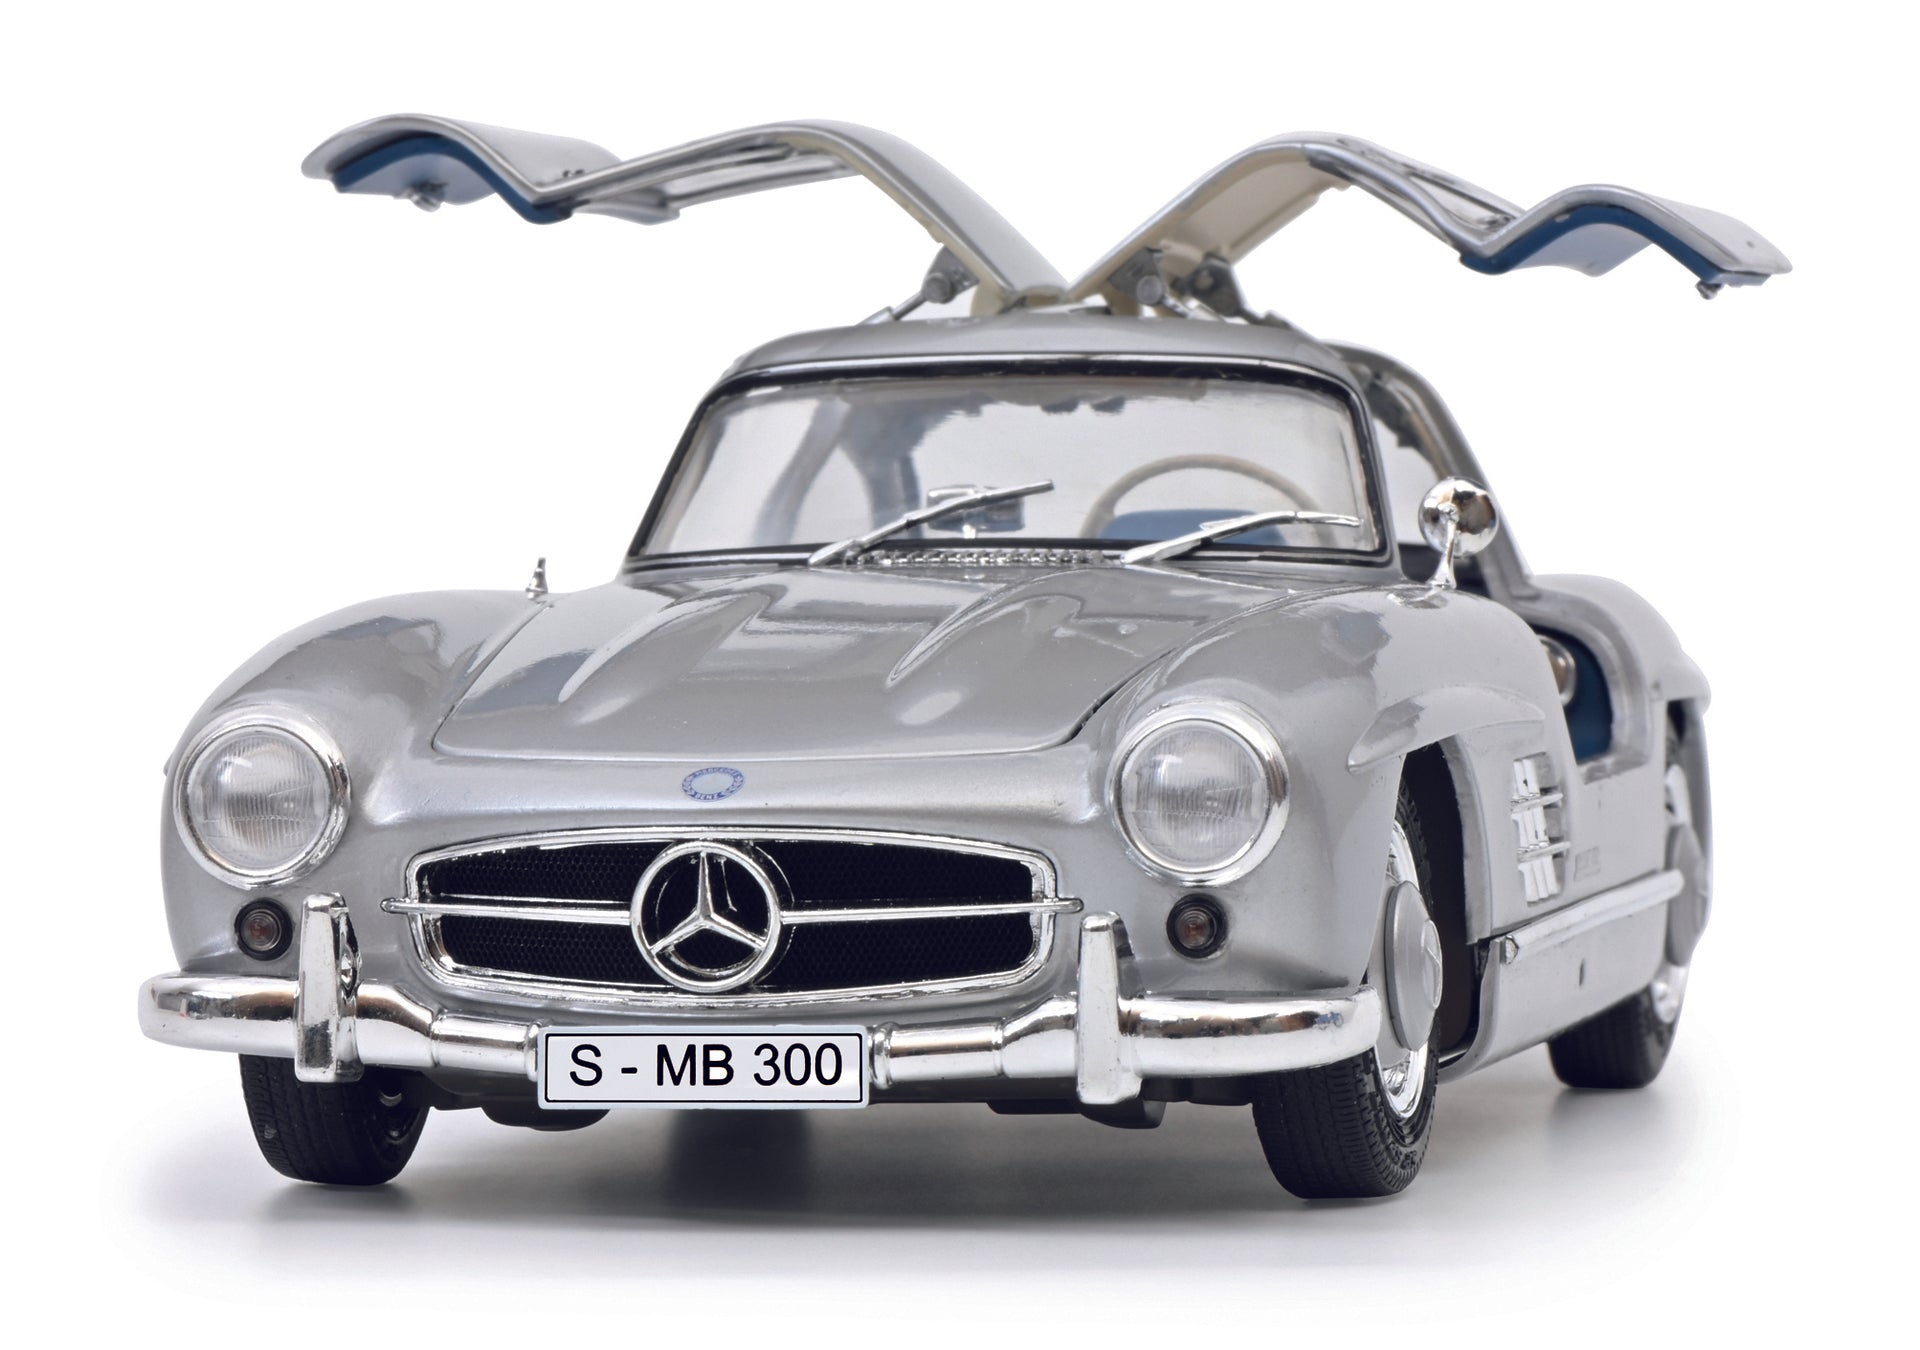 Schuco 450045200 - MB 300 SL Gullwing Silver  1:18 EAN: 4007864057580, at Ajckids.com, authorized Schuco dealer for the USA.